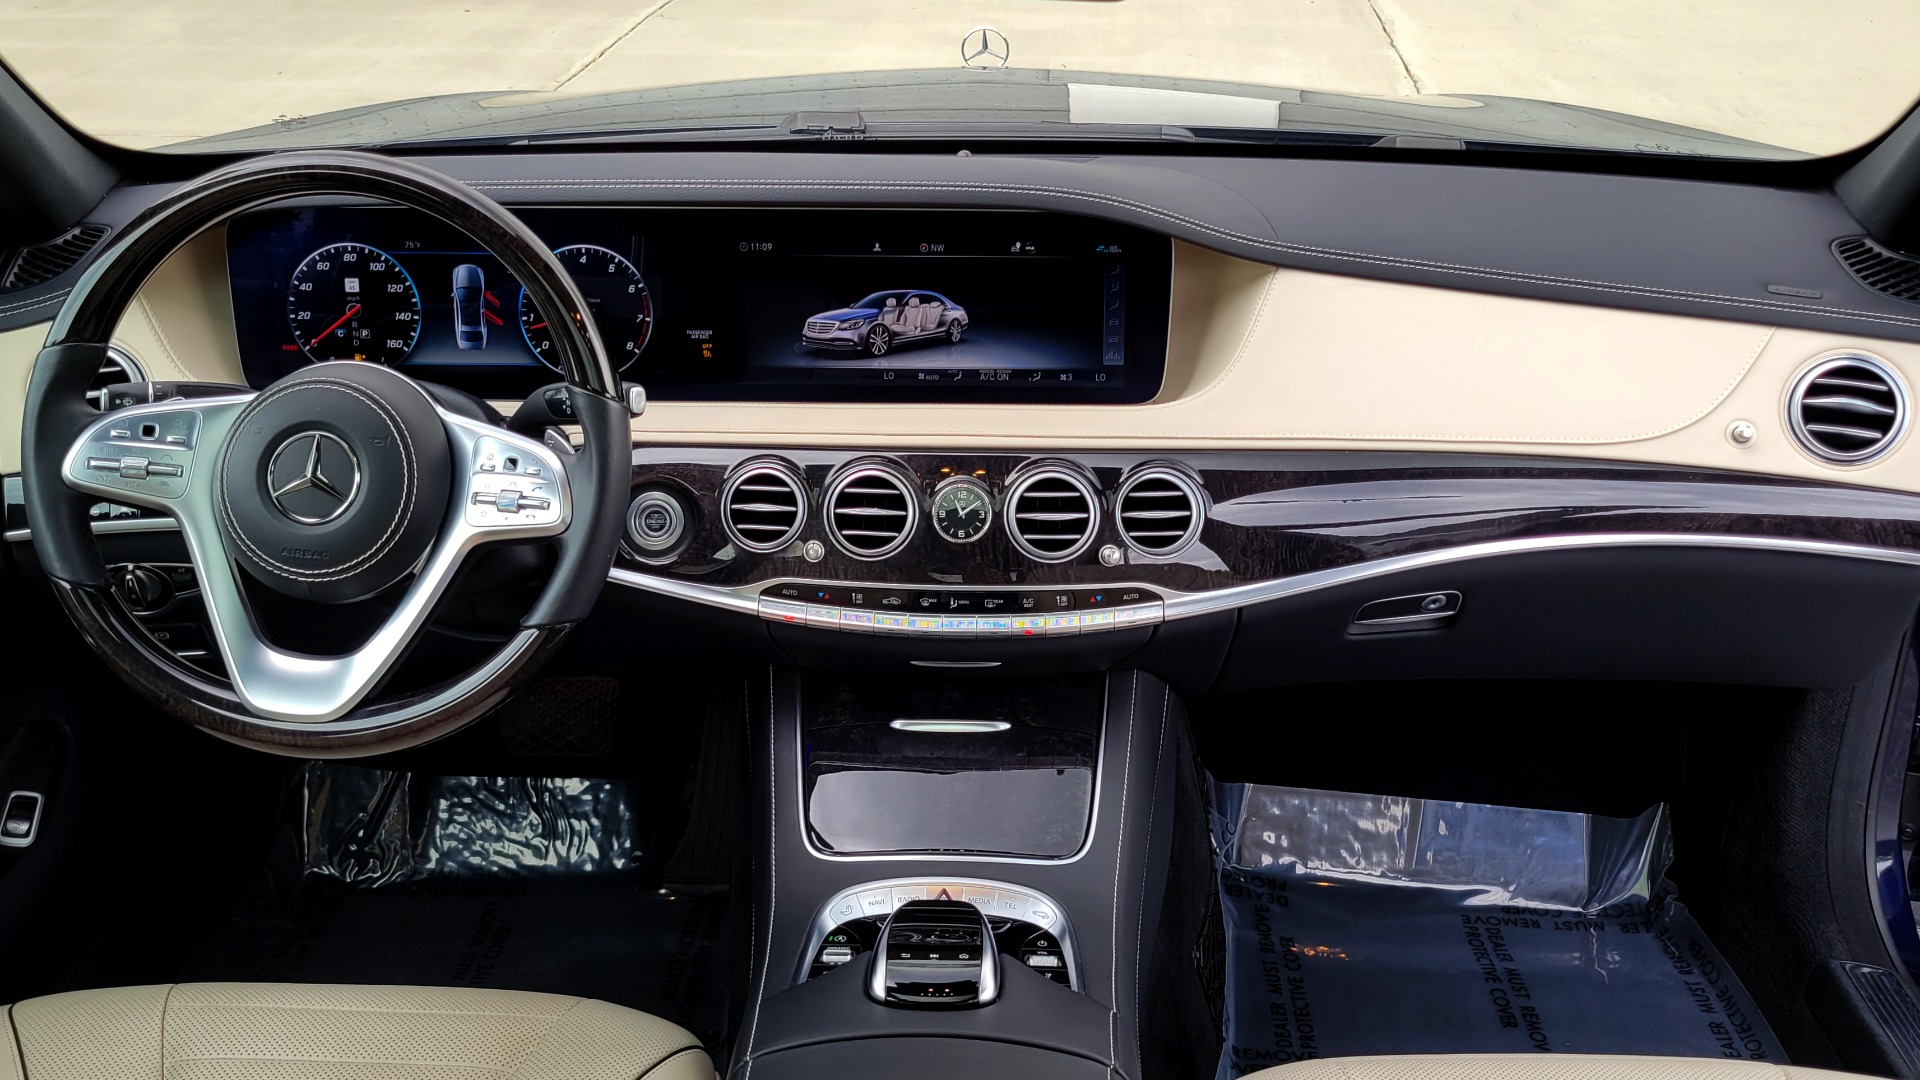 Used 2019 Mercedes-Benz S-CLASS S 560 4MATIC PREMIUM / DRVR ASST / WARMTH / NAV / REARVIEW for sale $72,995 at Formula Imports in Charlotte NC 28227 90